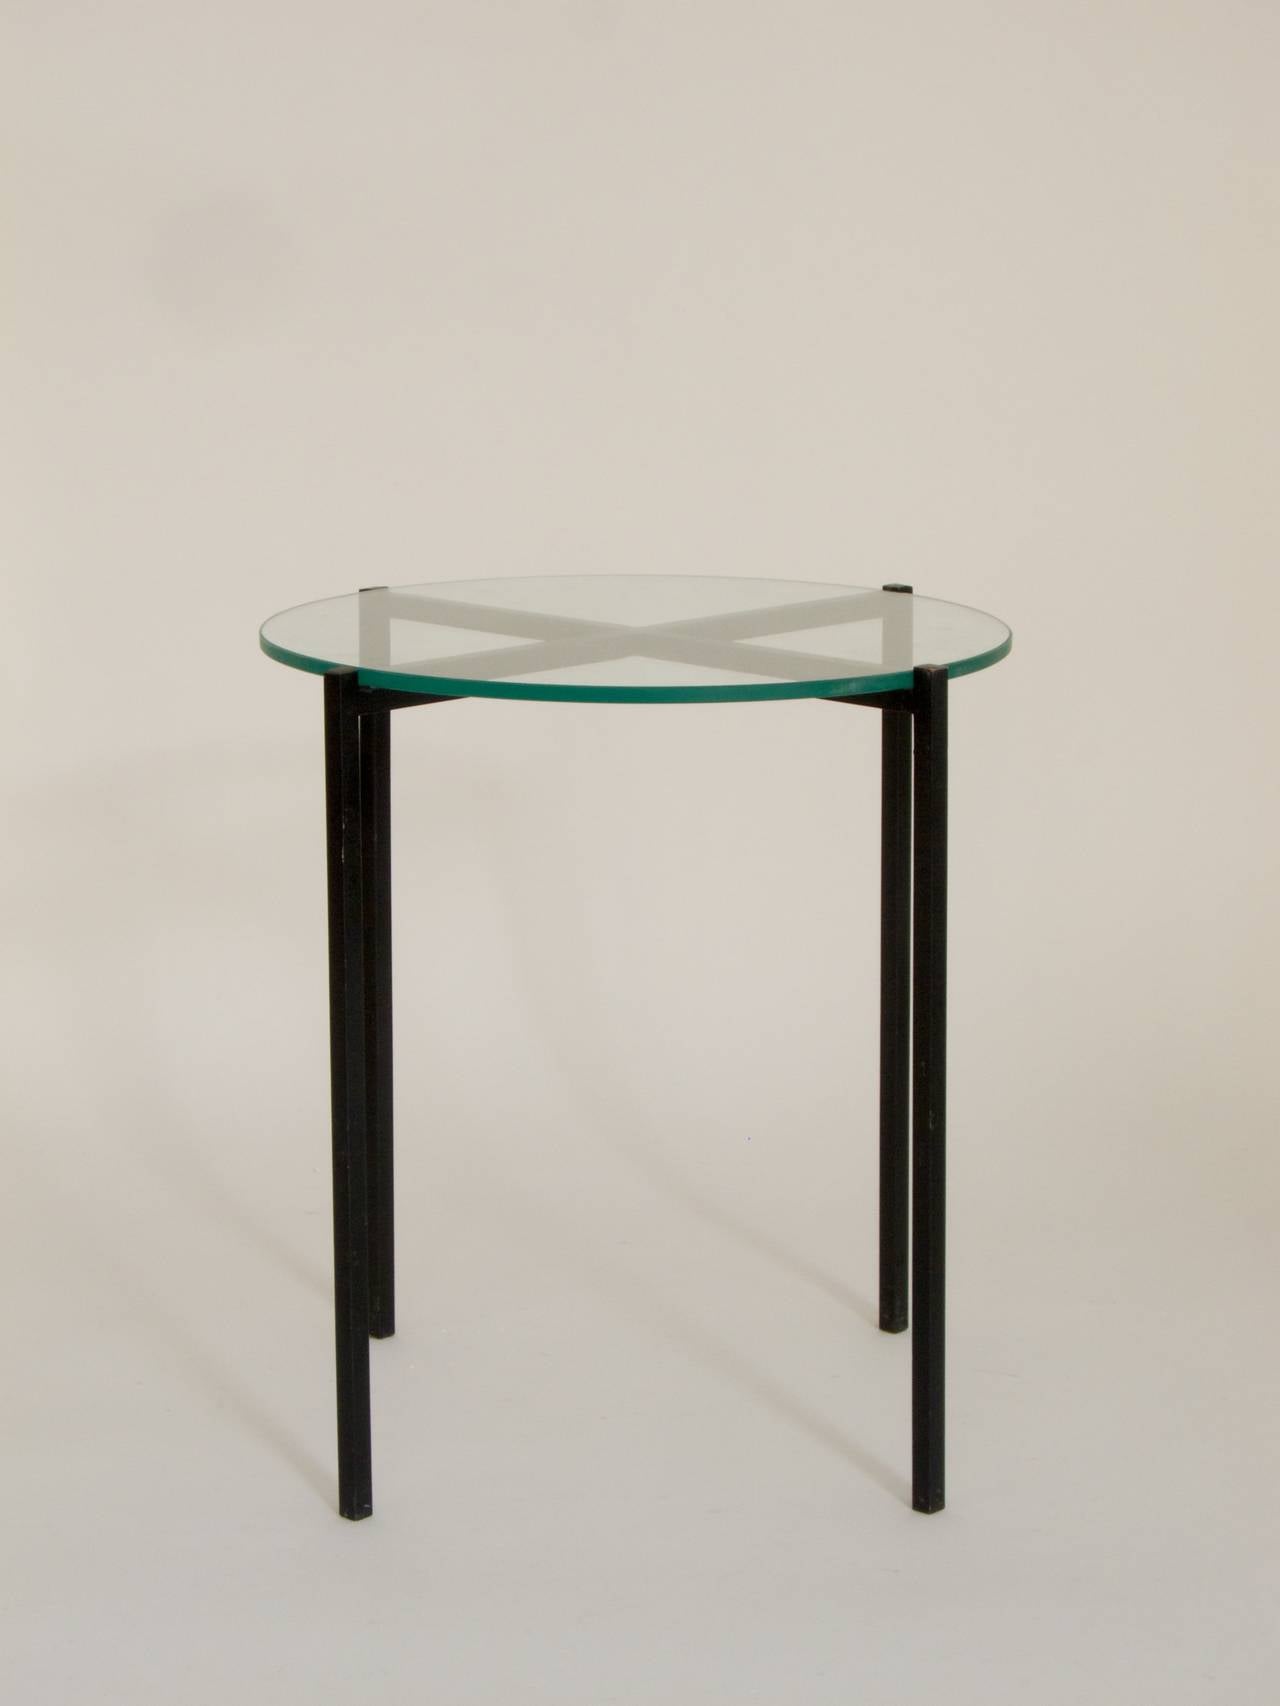 Small Side Table by Carl Auböck

back painted steel frame, glass top